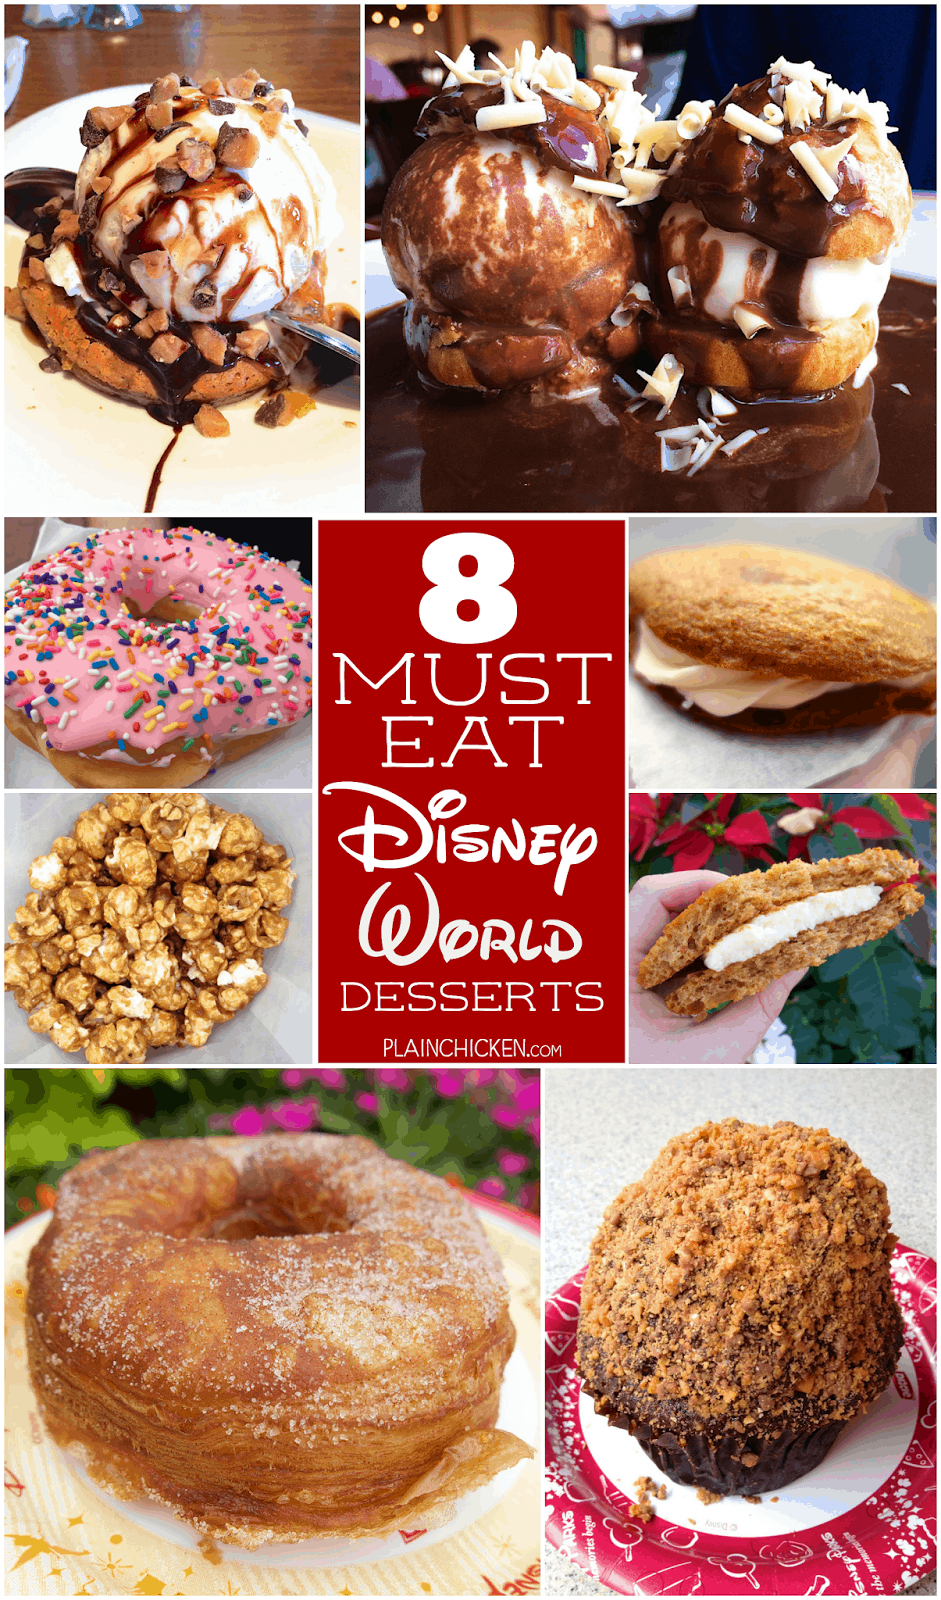 8 MUST EAT Disney World Desserts  - eight desserts found throughout Disney World theme parks. You don't want to miss these! Make sure to wear your stretchy pants! LOL!